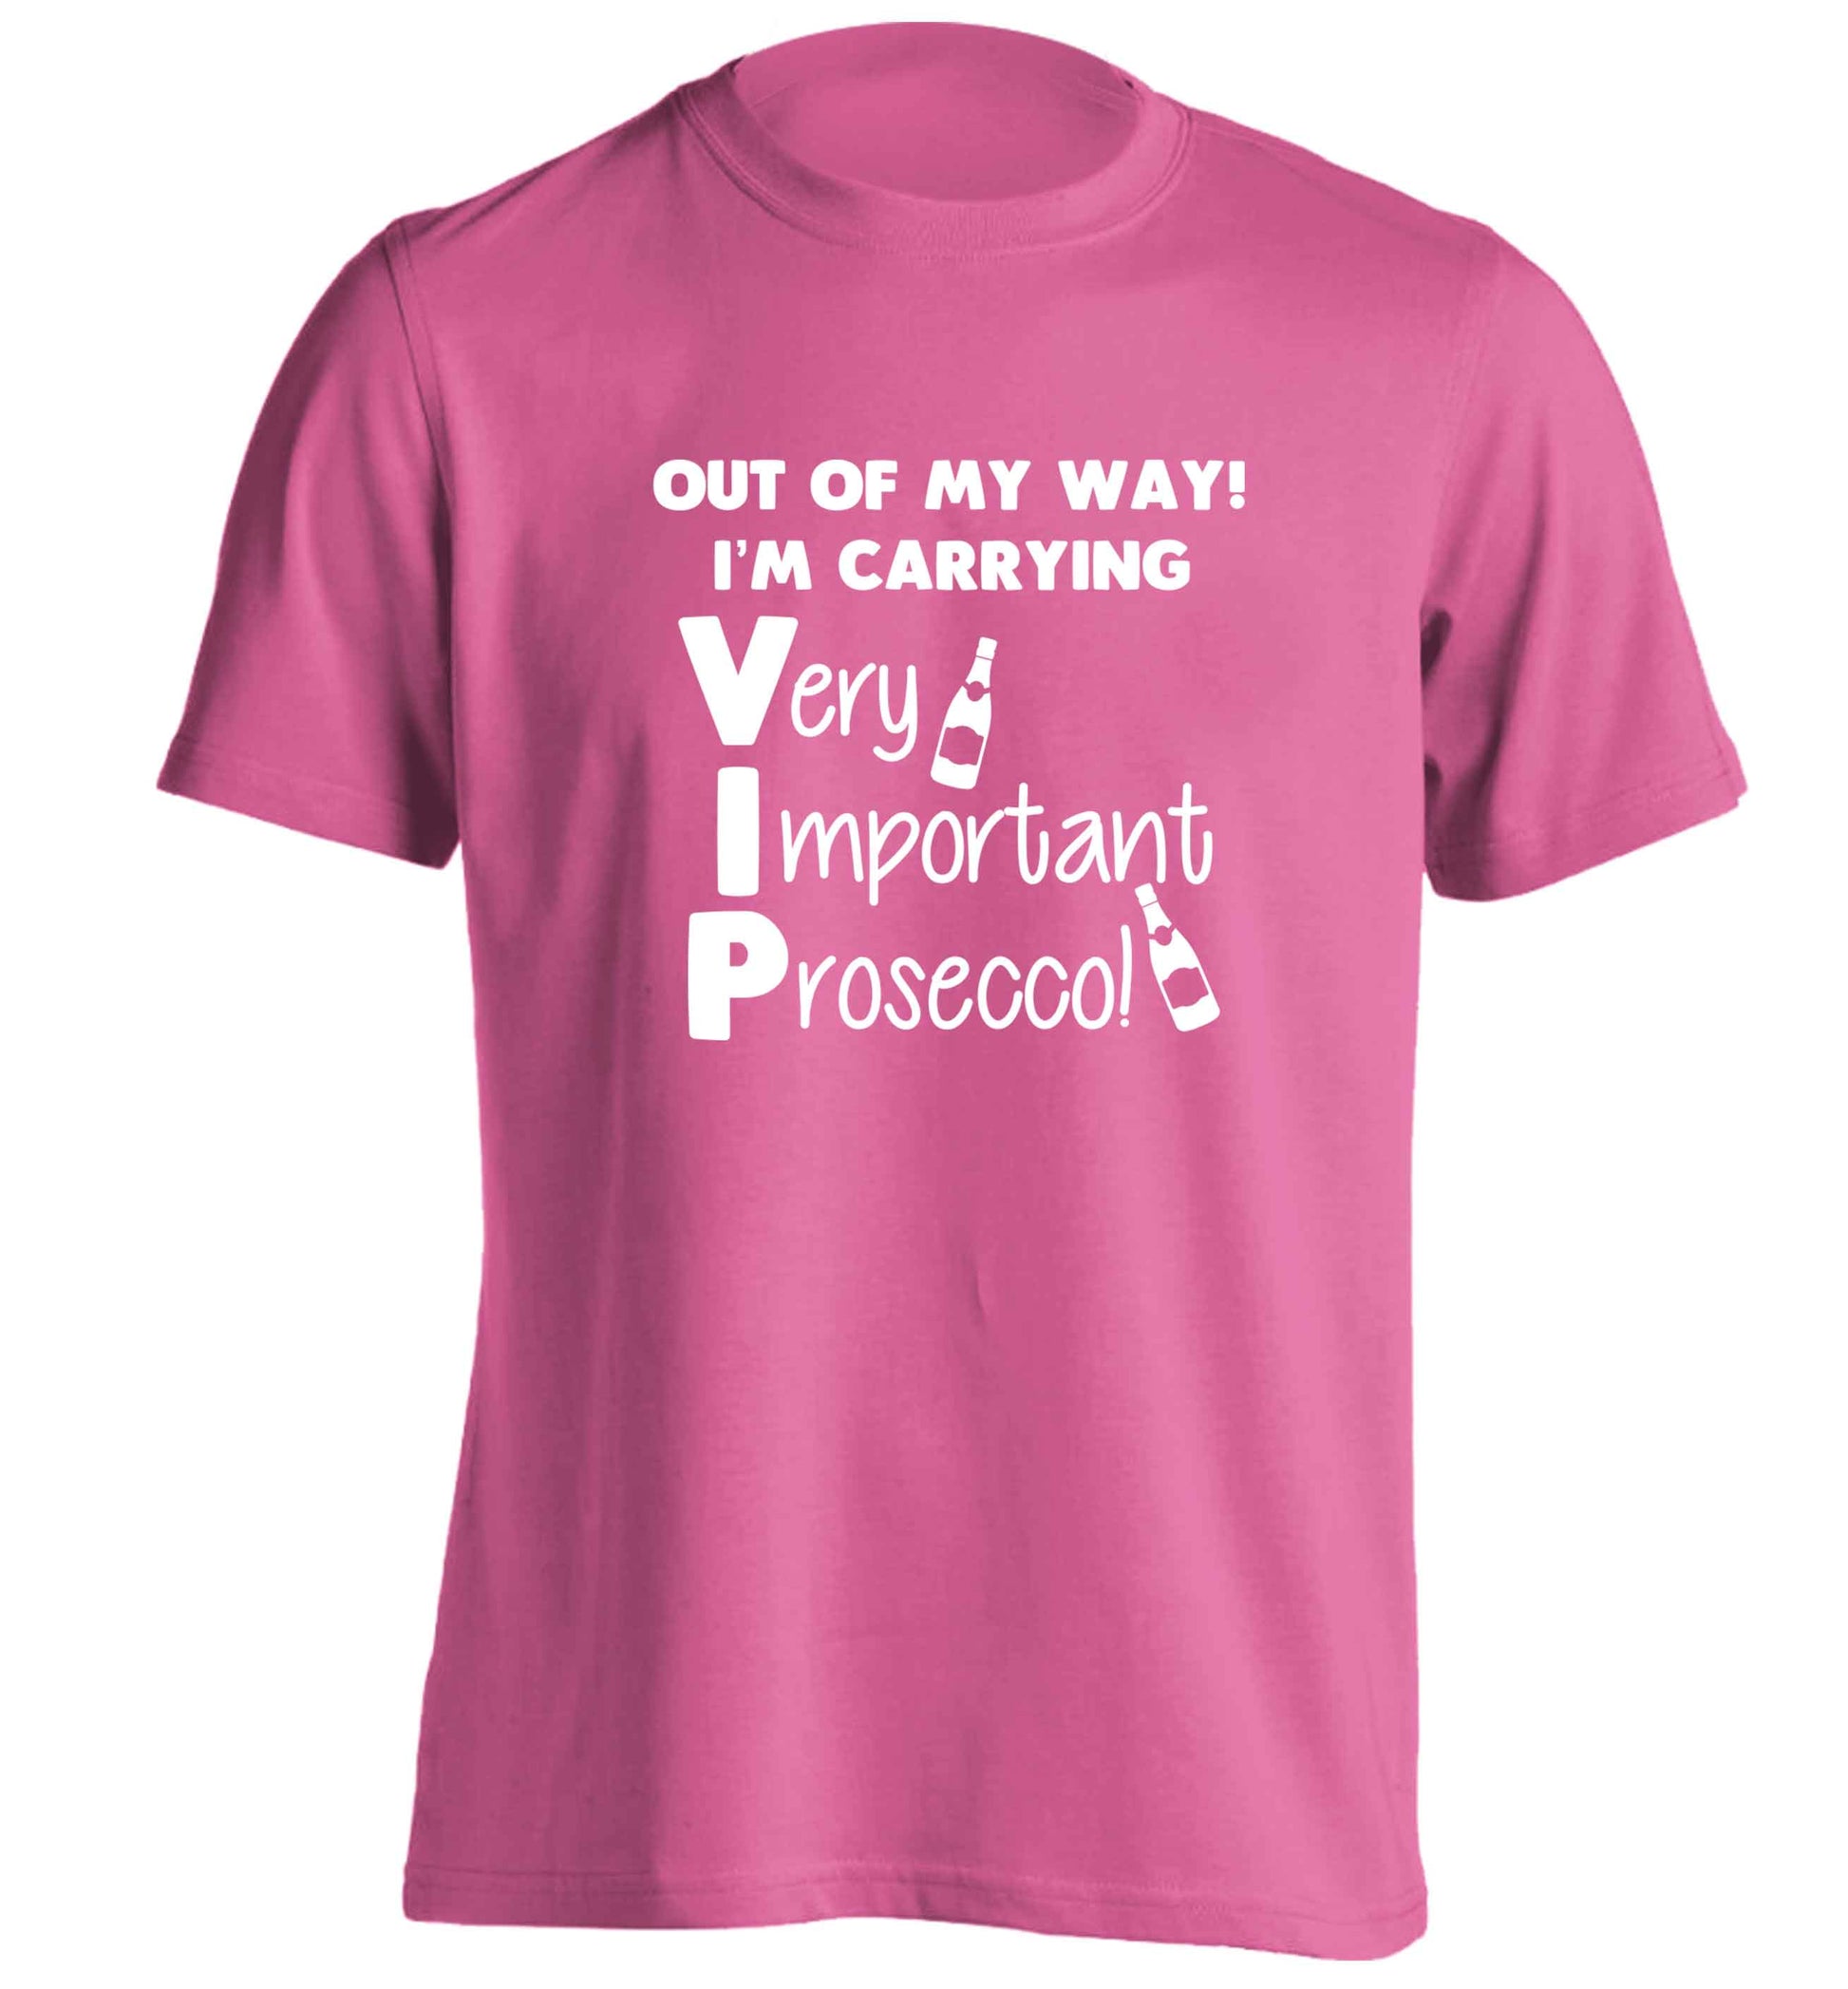 Out of my way I'm carrying very important prosecco! adults unisex pink Tshirt 2XL